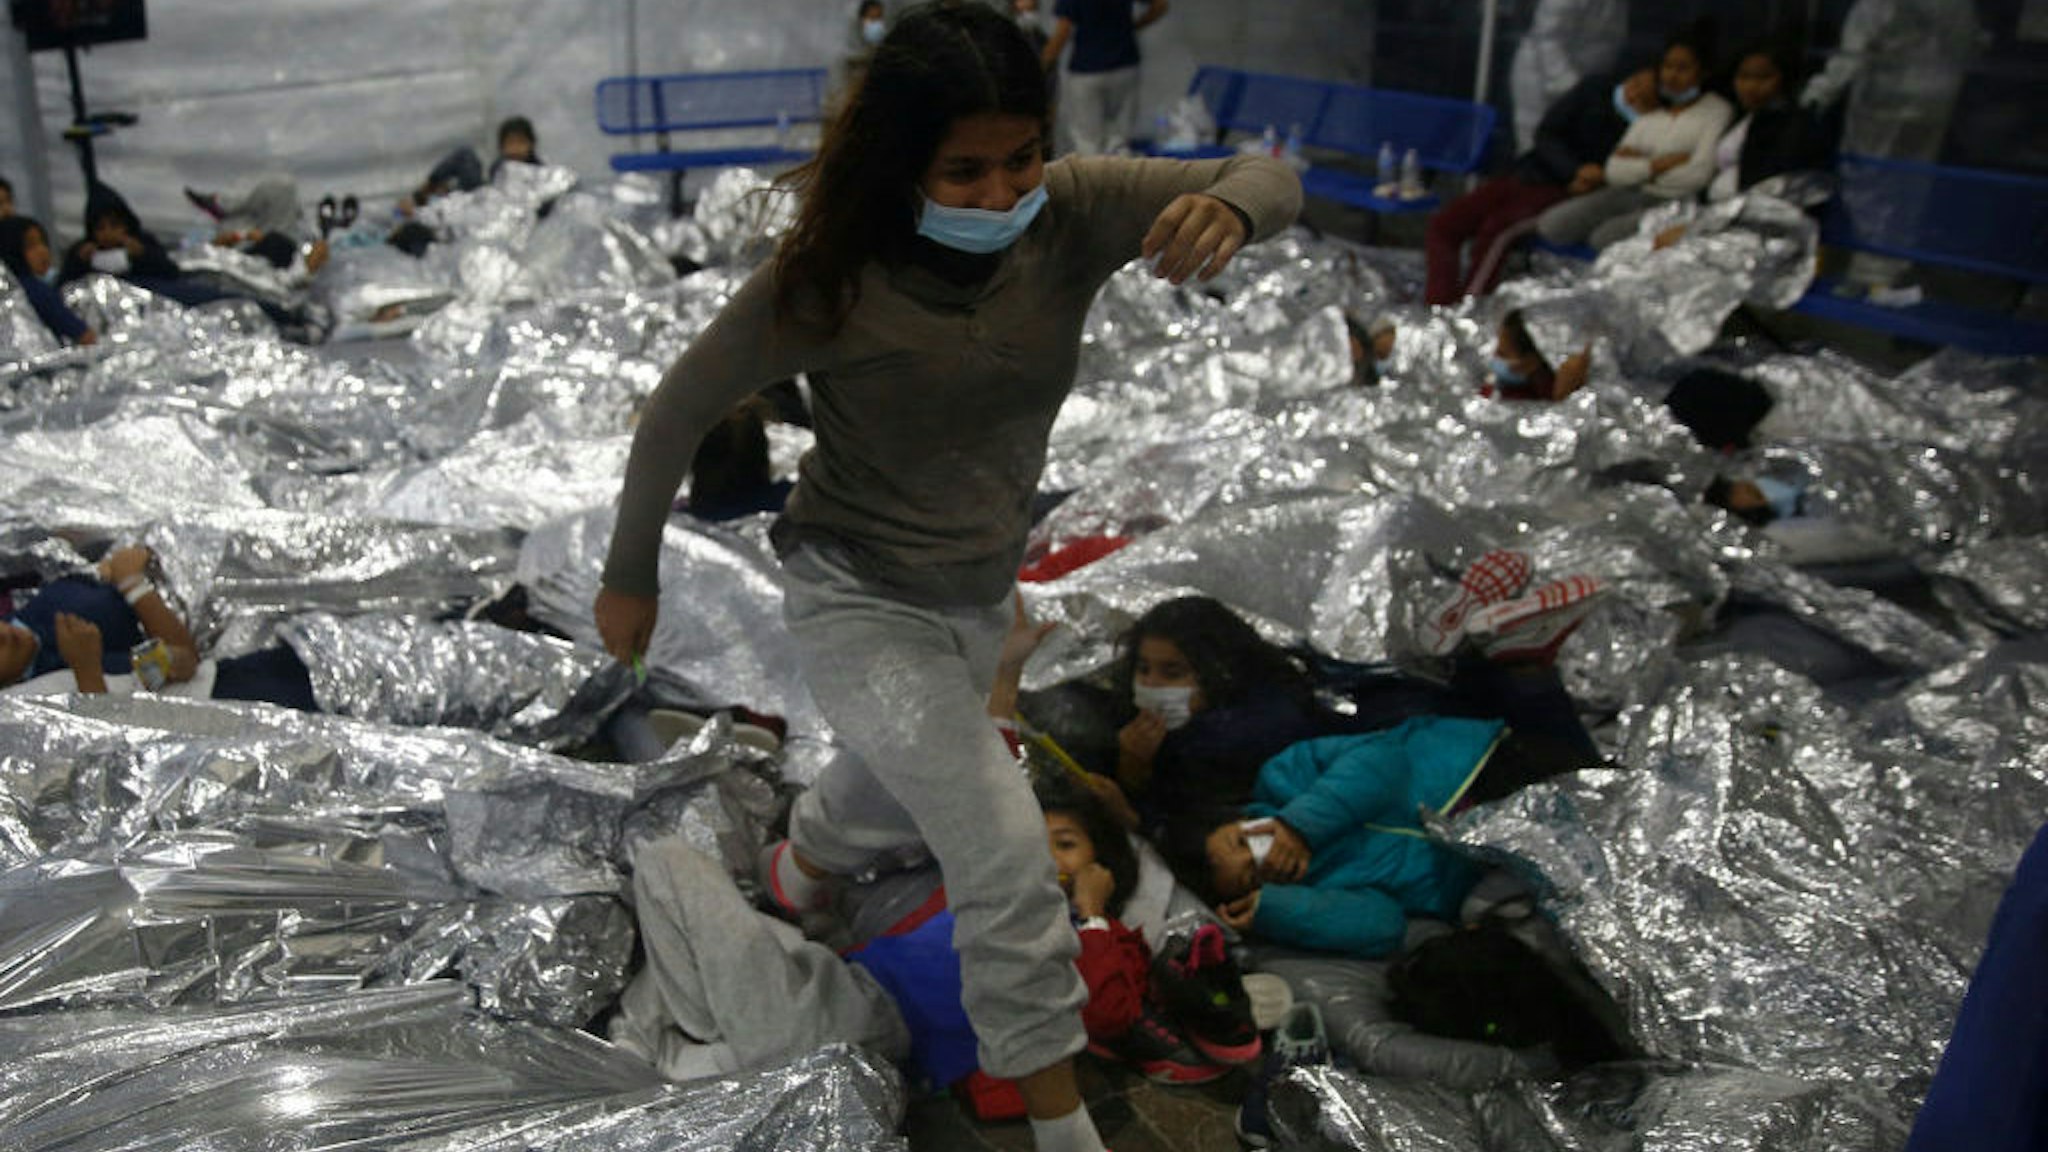 TOPSHOT - A young female minor walks over others as they lie inside a pod for females at the Donna Department of Homeland Security holding facility, the main detention center for unaccompanied children in the Rio Grande Valley run by the US Customs and Border Protection, (CBP), in Donna, Texas on March 30, 2021. - The minors are housed by the hundreds in eight pods that are about 3,200 square feet in size. Many of the pods had more than 500 children in them. The Biden administration on Tuesday for the first time allowed journalists inside its main detention facility at the border for migrant children, revealing a severely overcrowded tent structure where more than 4,000 kids and families were crammed into pods and the youngest kept in a large play pen with mats on the floor for sleeping. (Photo by Dario Lopez-Mills / POOL / AFP) (Photo by DARIO LOPEZ-MILLS/POOL/AFP via Getty Images)